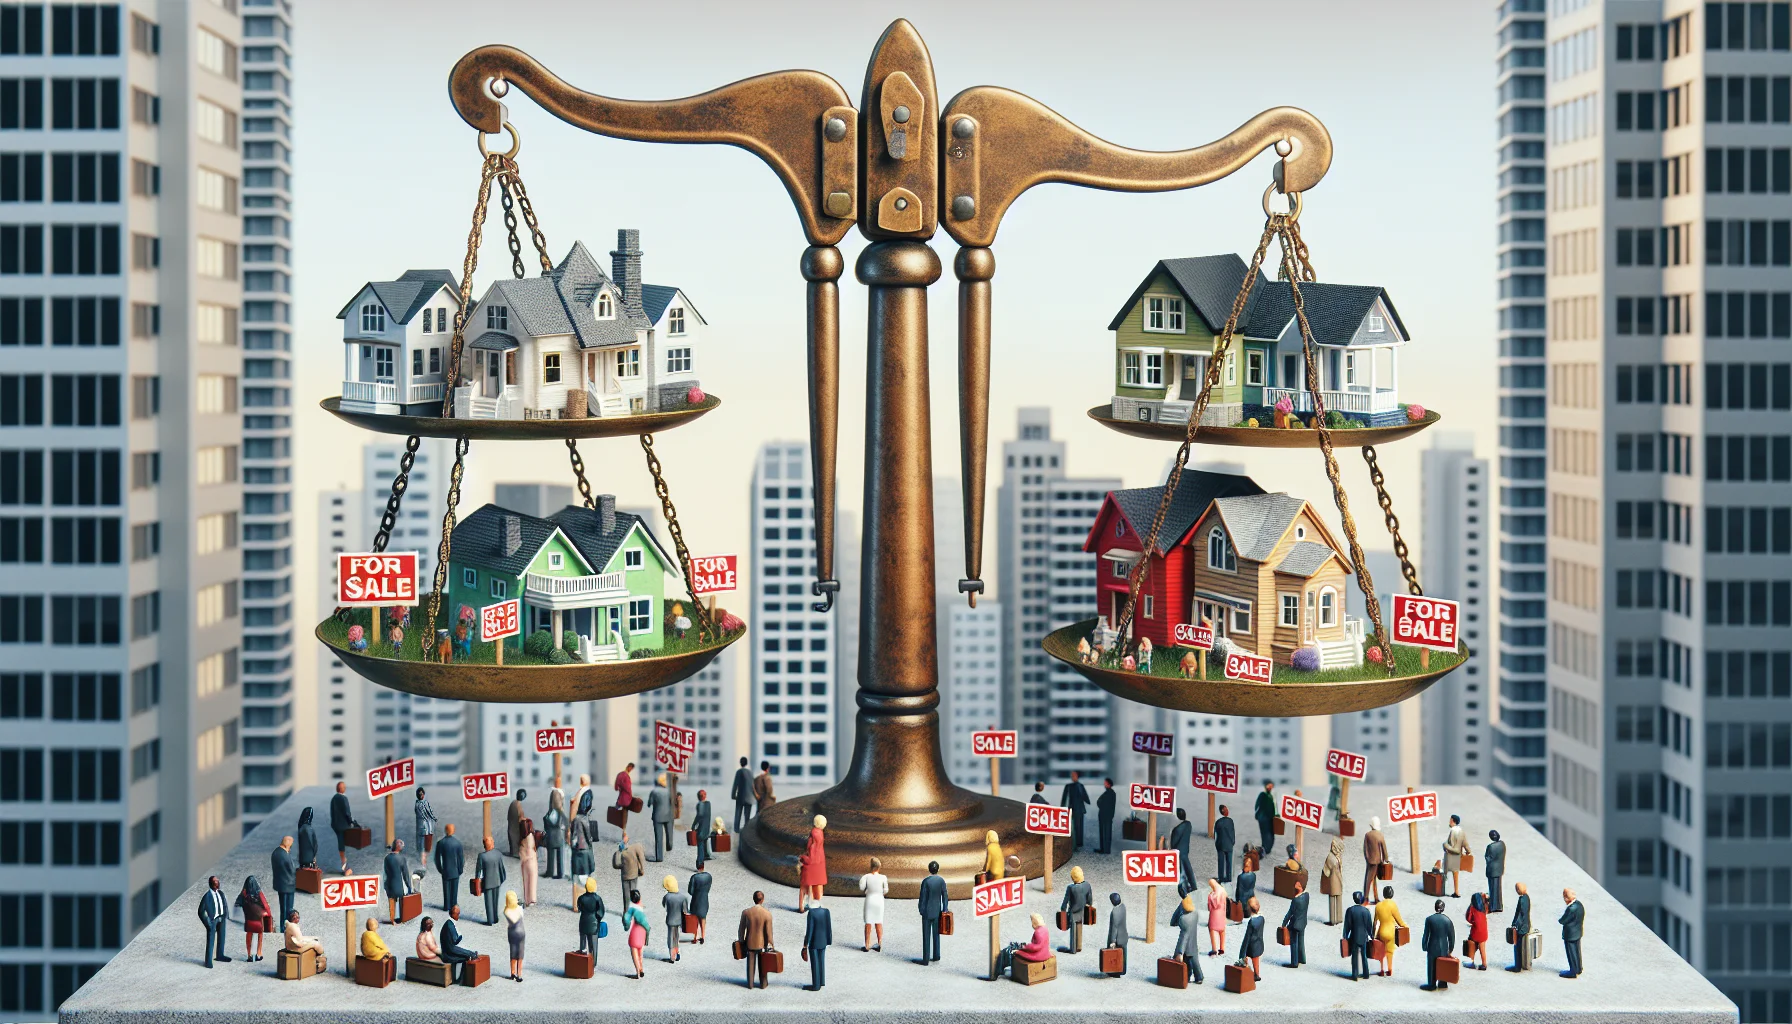 A unique and humorous scene representing the real estate market: the balance between buyers and sellers. Illustrate a large scale or balance in the middle of a bustling city with skyscrapers. On one side, there are tiny figures of enthusiastic potential homebuyers of various descents such as Caucasian, Hispanic, Black, Middle-Eastern, and South-Asian and genders. They're eyeing at a pile of beautifully crafted miniature houses. On the other side, real estate agents of mixed descents and genders are holding signs saying 'For Sale', sitting amongst multiple houses. Both ends of the scale are perfectly balanced, indicating a balanced market.